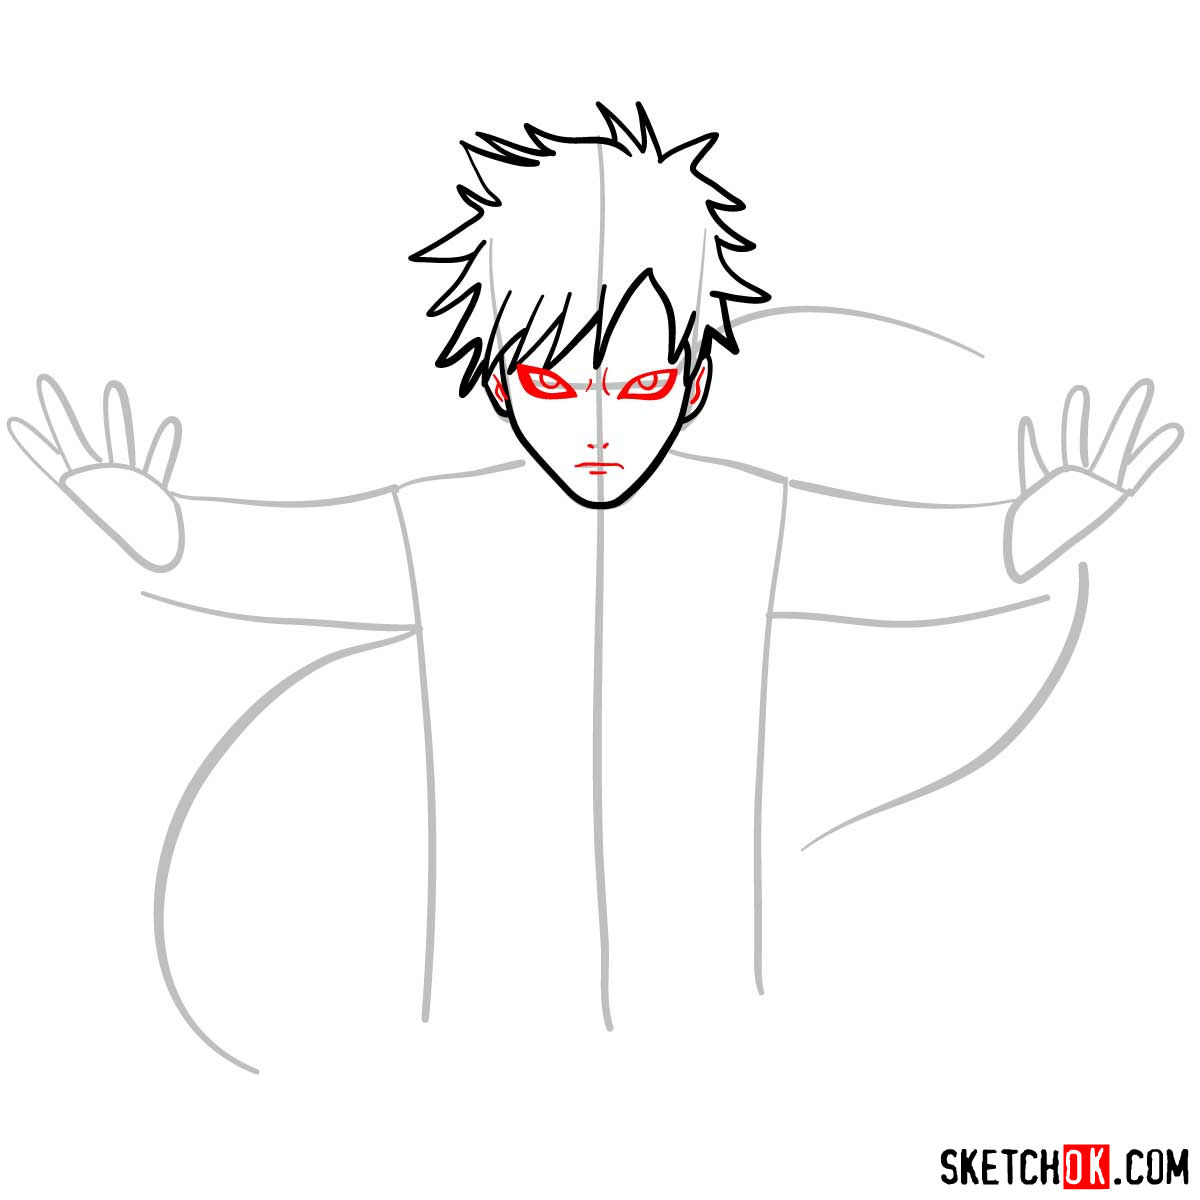 How to draw Gaara from Naruto anime - step 05